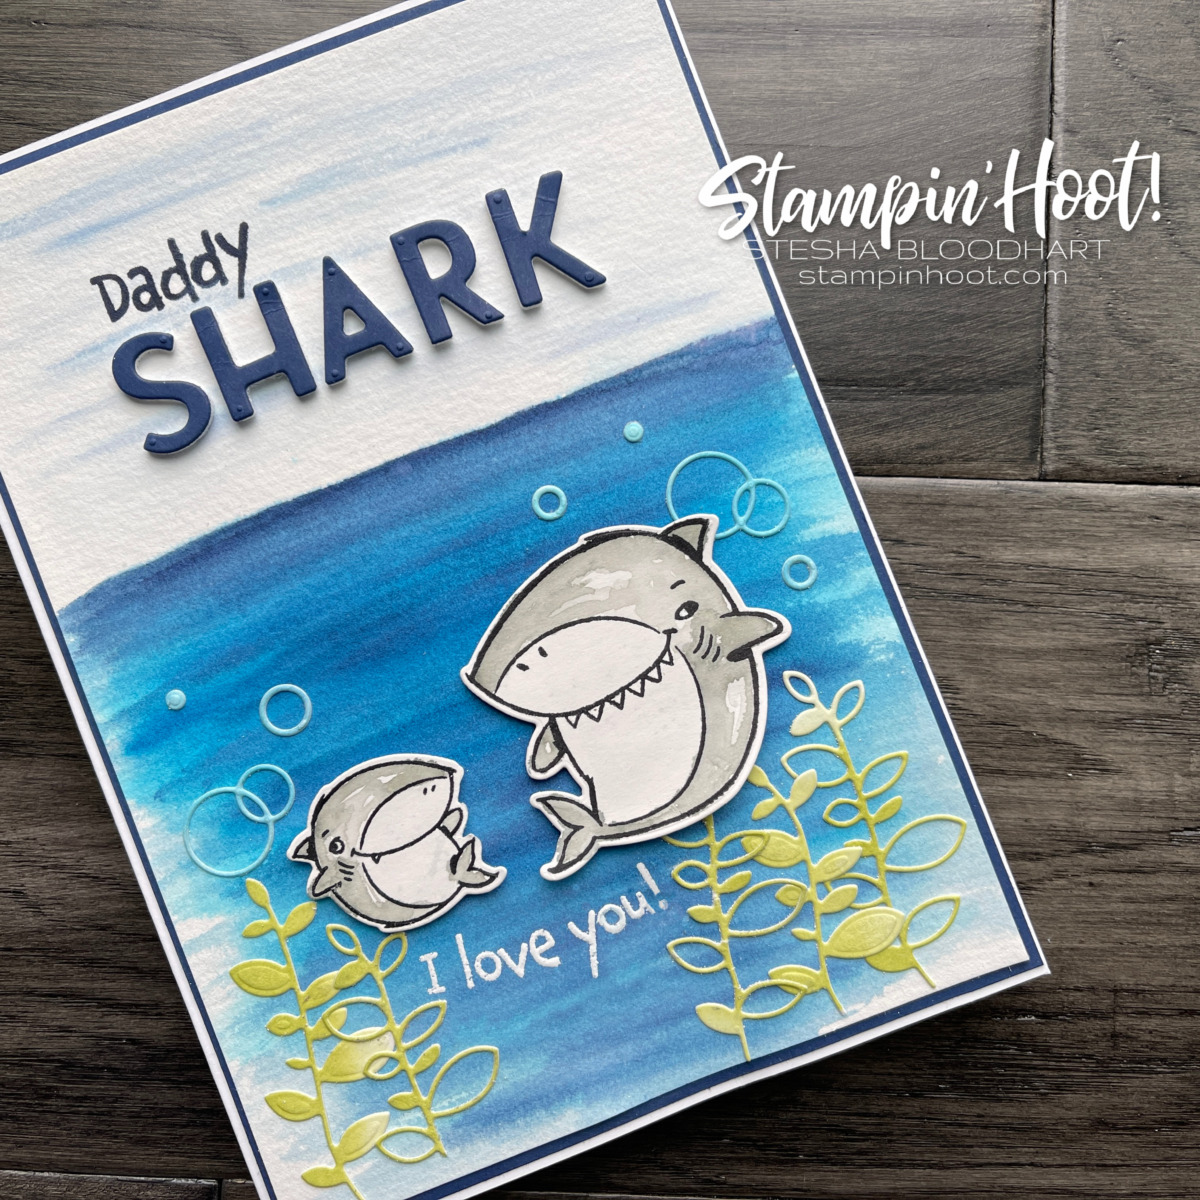 Shark Frenzy Stamp Set from Stampin' Up! Daddy Card by Stesha Bloodhart, Stampin' Hoot! (1)